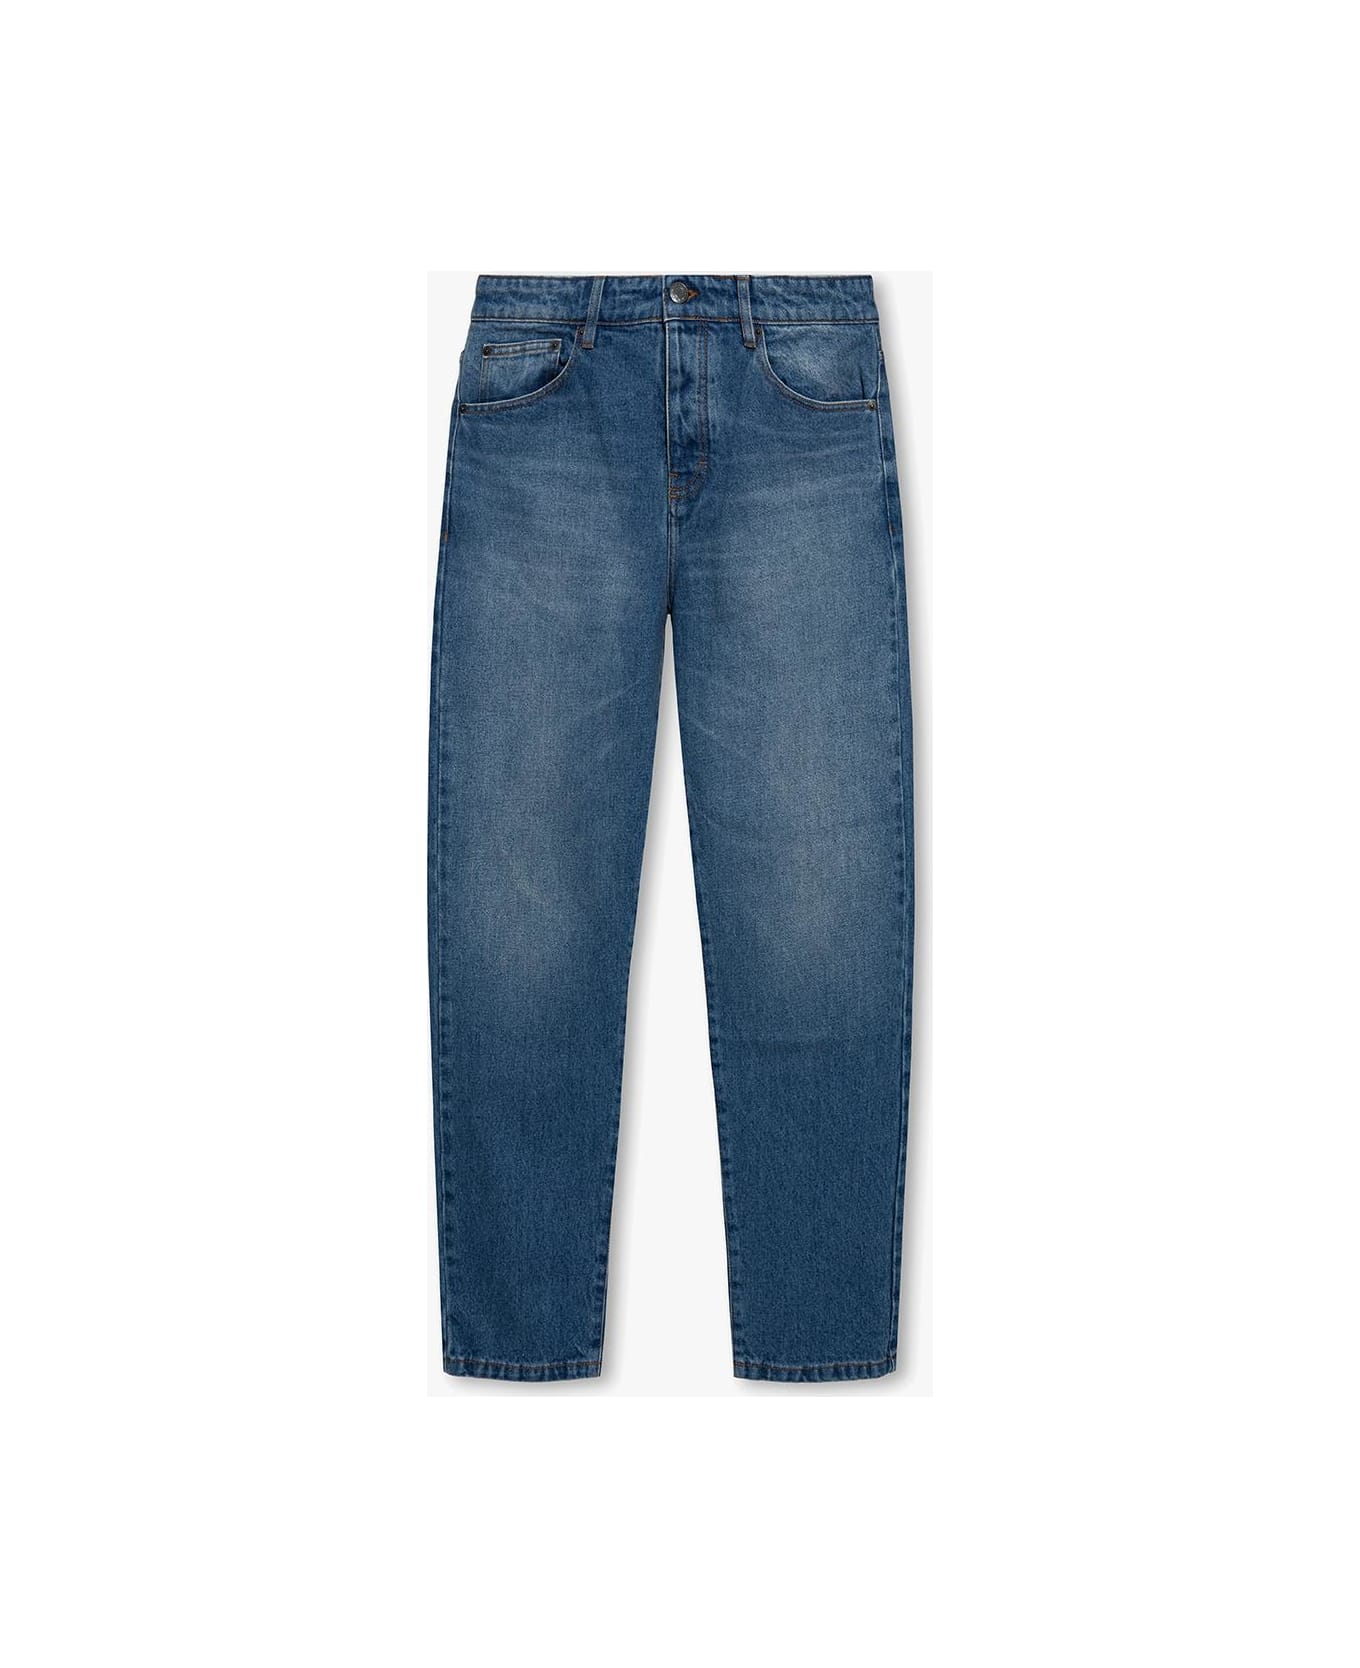 Ami Alexandre Mattiussi Jean With Slightly Tapered Legs - NAVY